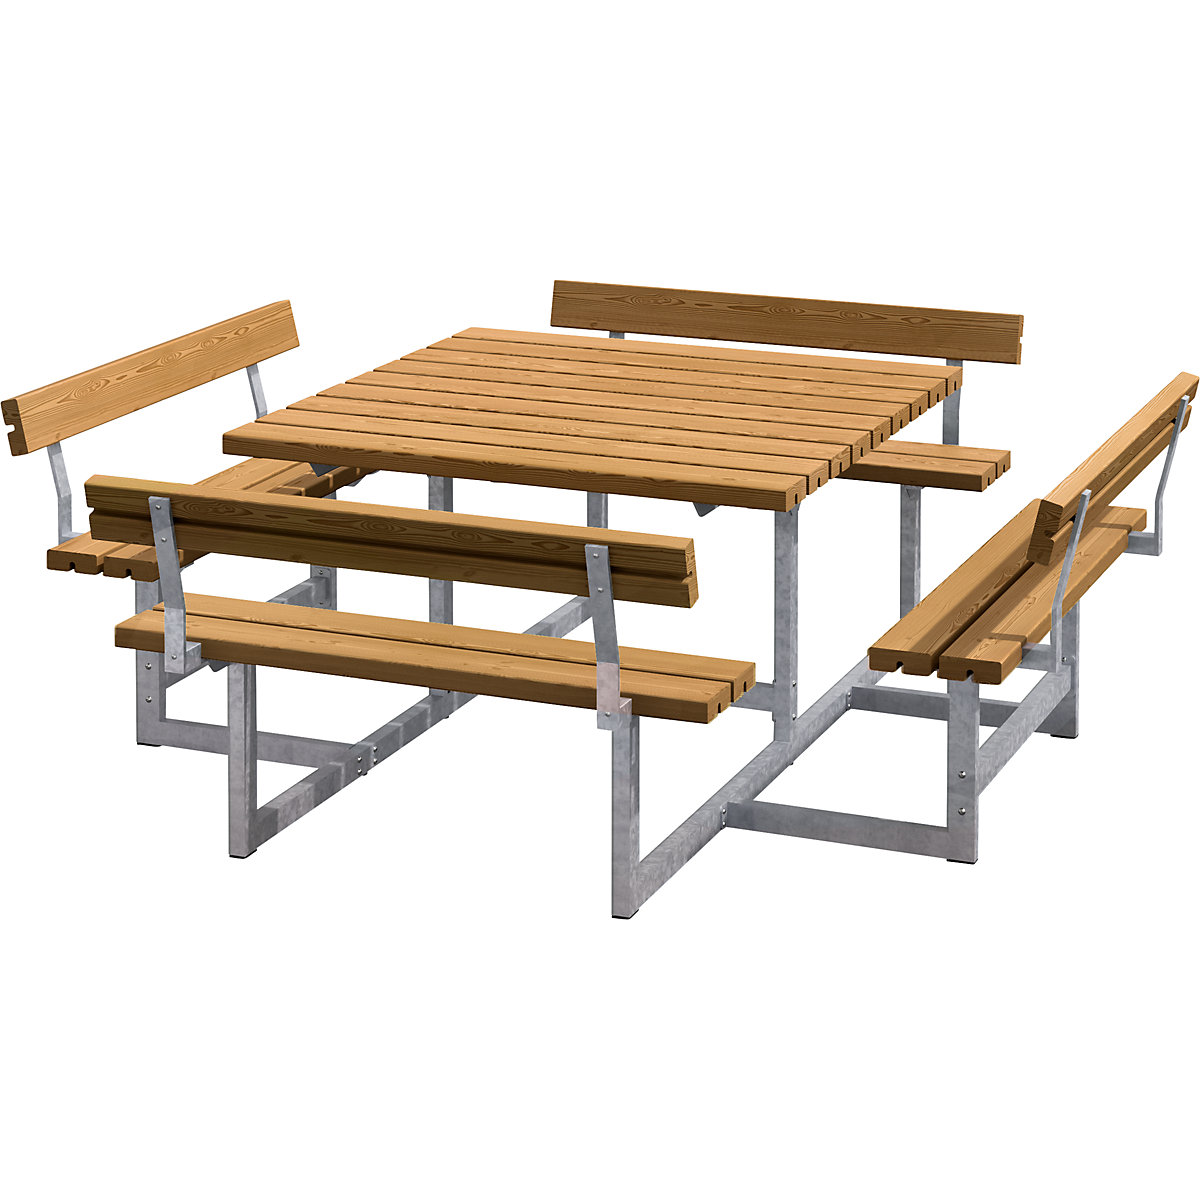 Picnic bench for 8 people